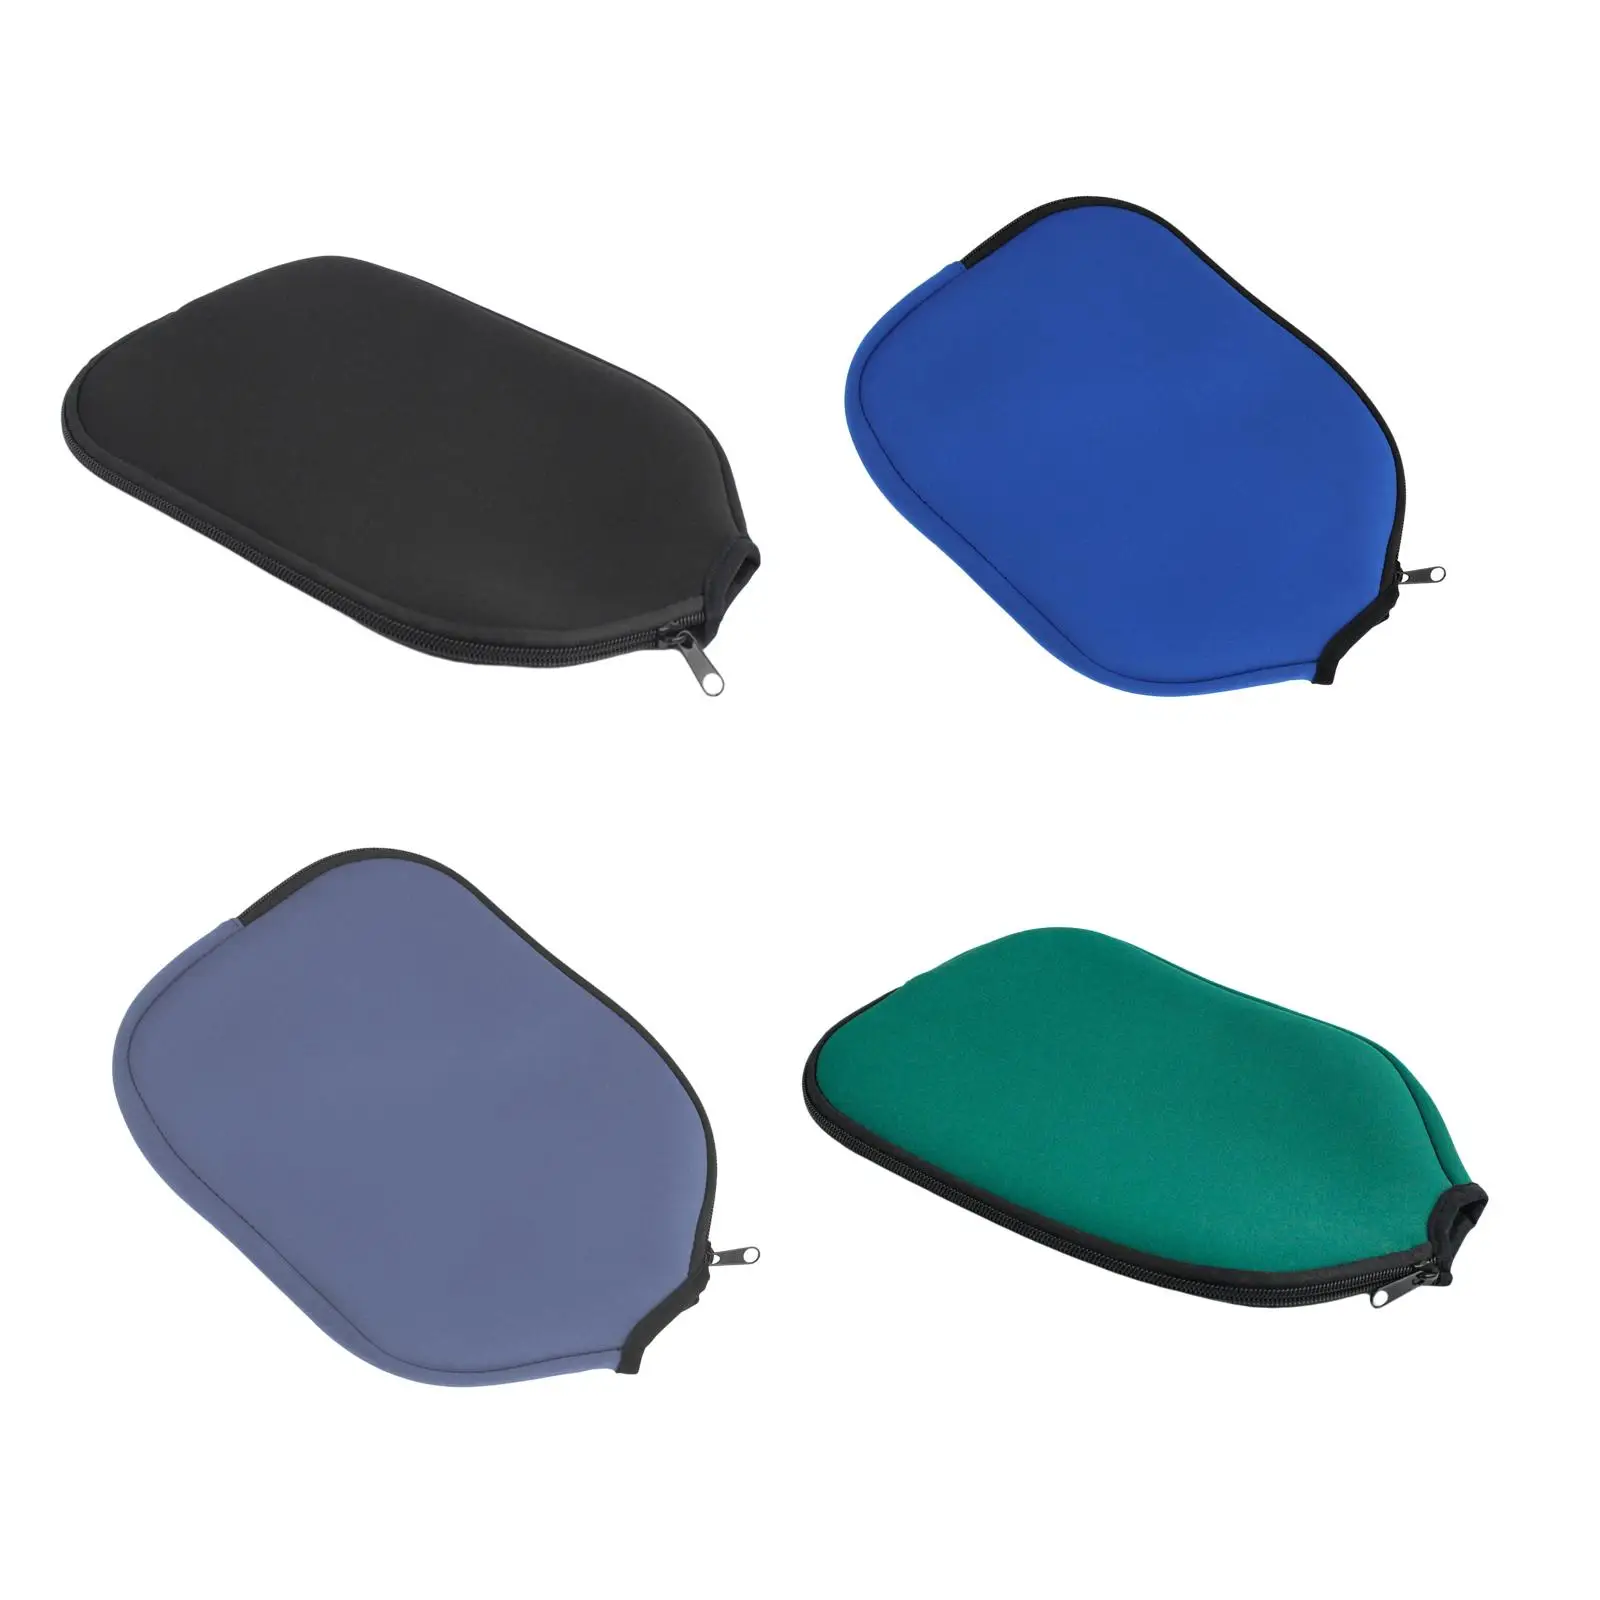 Neoprene Paddle Cover Protective Sleeve Zipper Table Tennis Paddle Case Premium